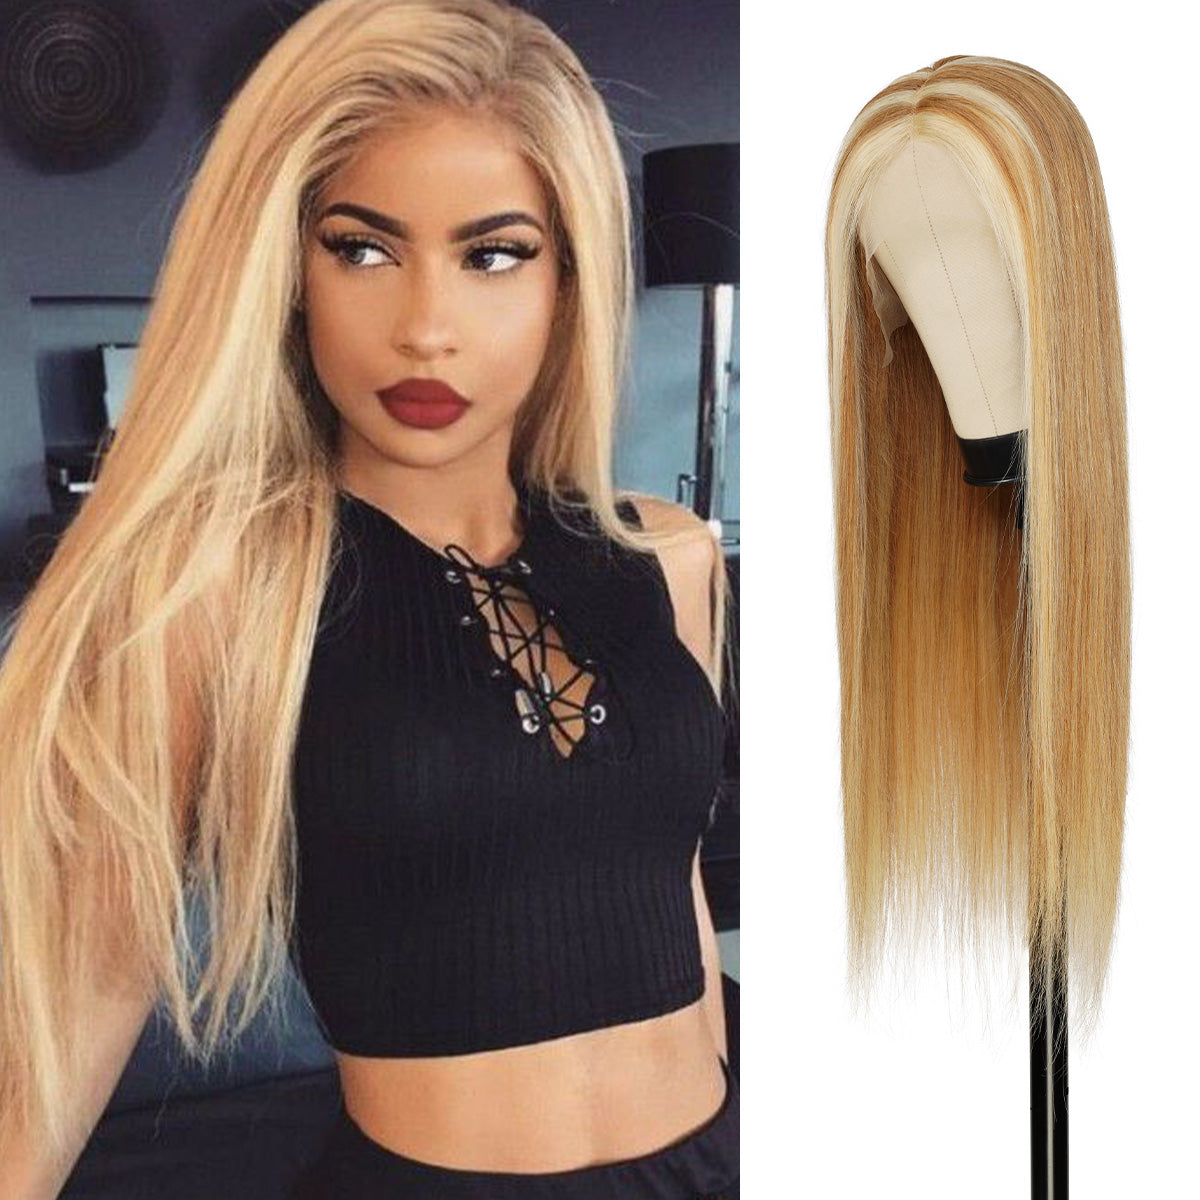 Transparent T part Lace Front Wig, Middle part wig of easy and comfortable to wear, 100% Virgin Hair from one donor, Honey Blonde Highlight, Trending tiktok viral wig, This is your go-to hairstyle